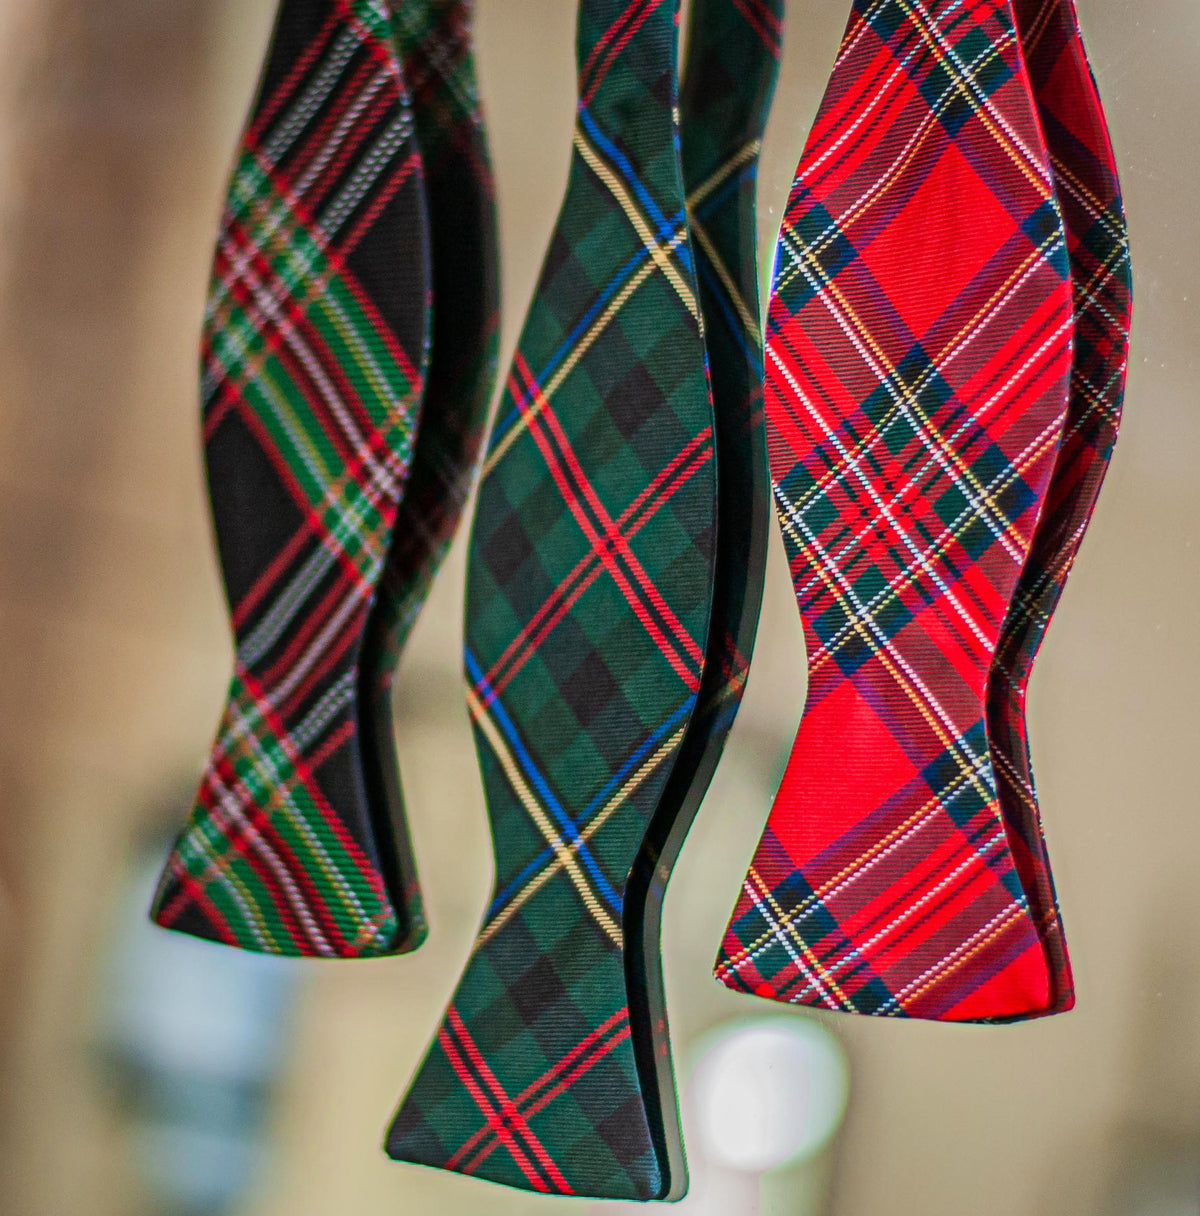 Scottish Plaid: A Timeless Fashion Staple and Cultural Symbol